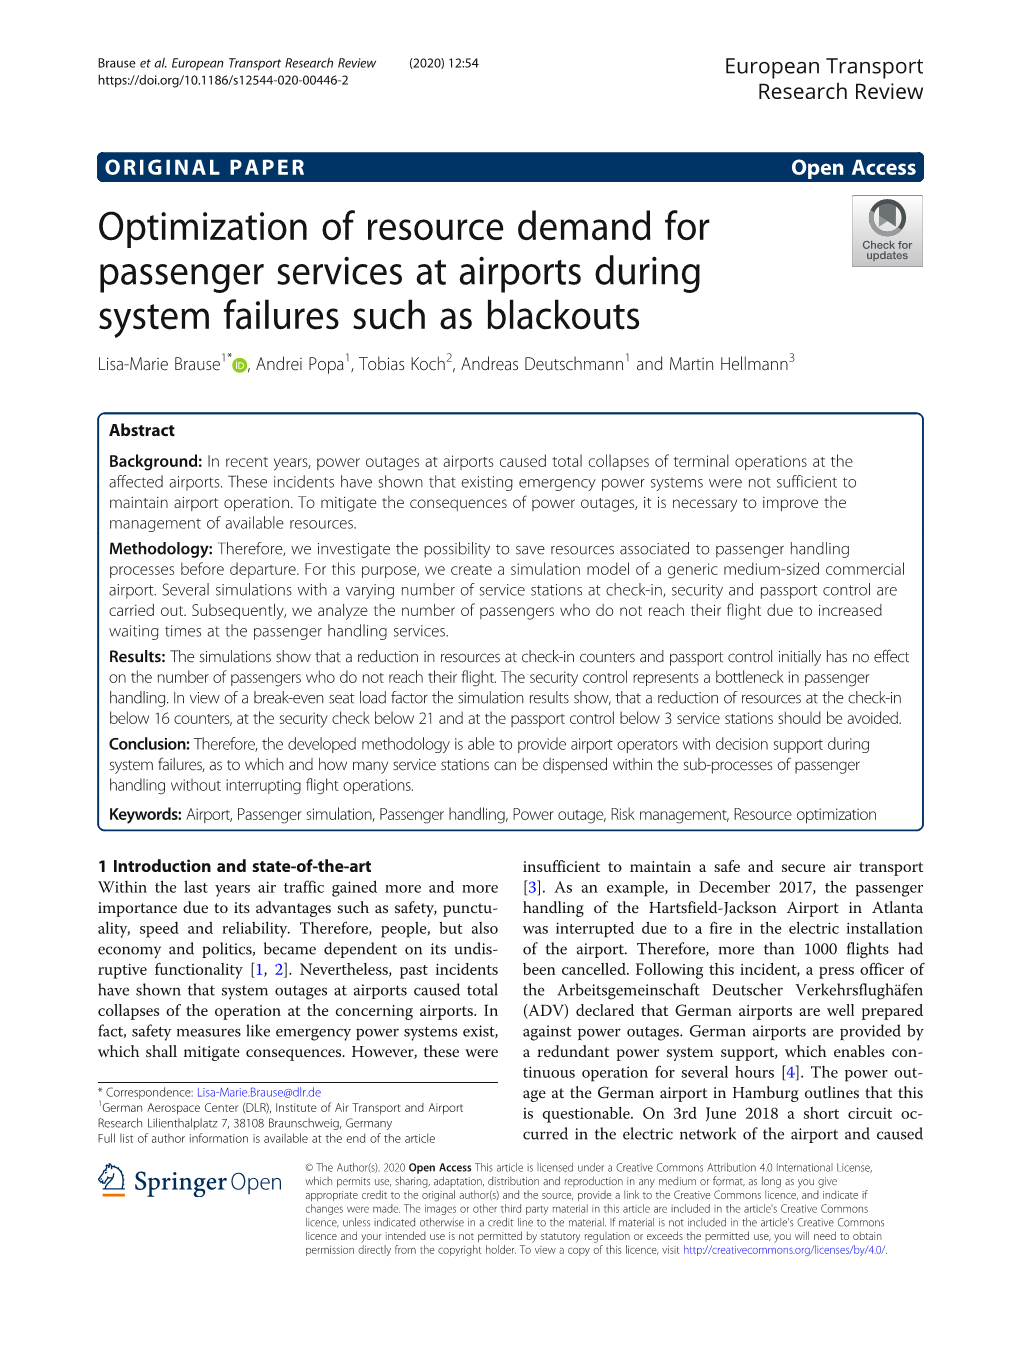 Optimization of Resource Demand for Passenger Services at Airports